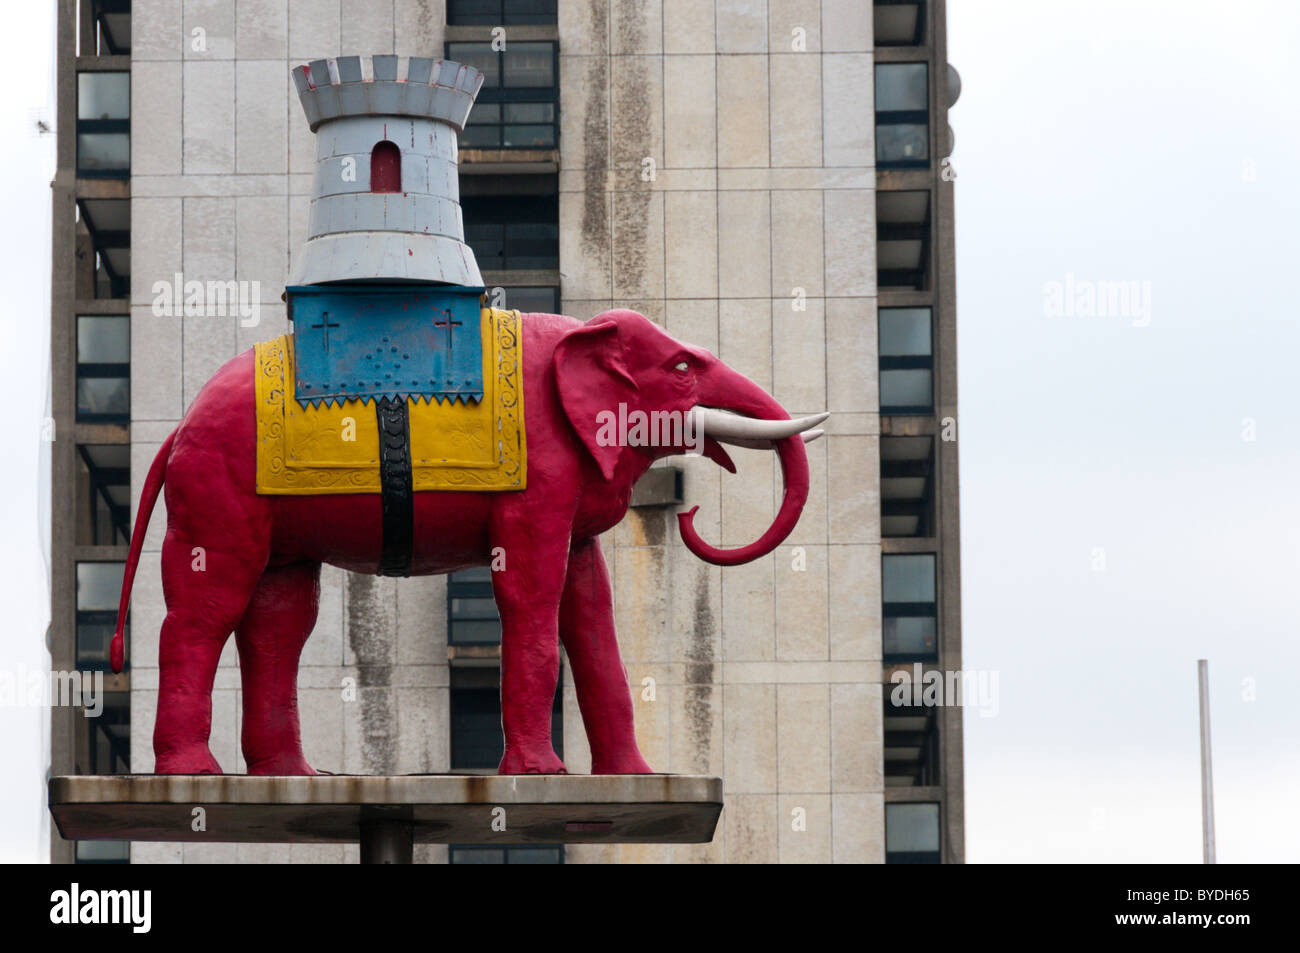 Welcoming the Elephant and Castle statue